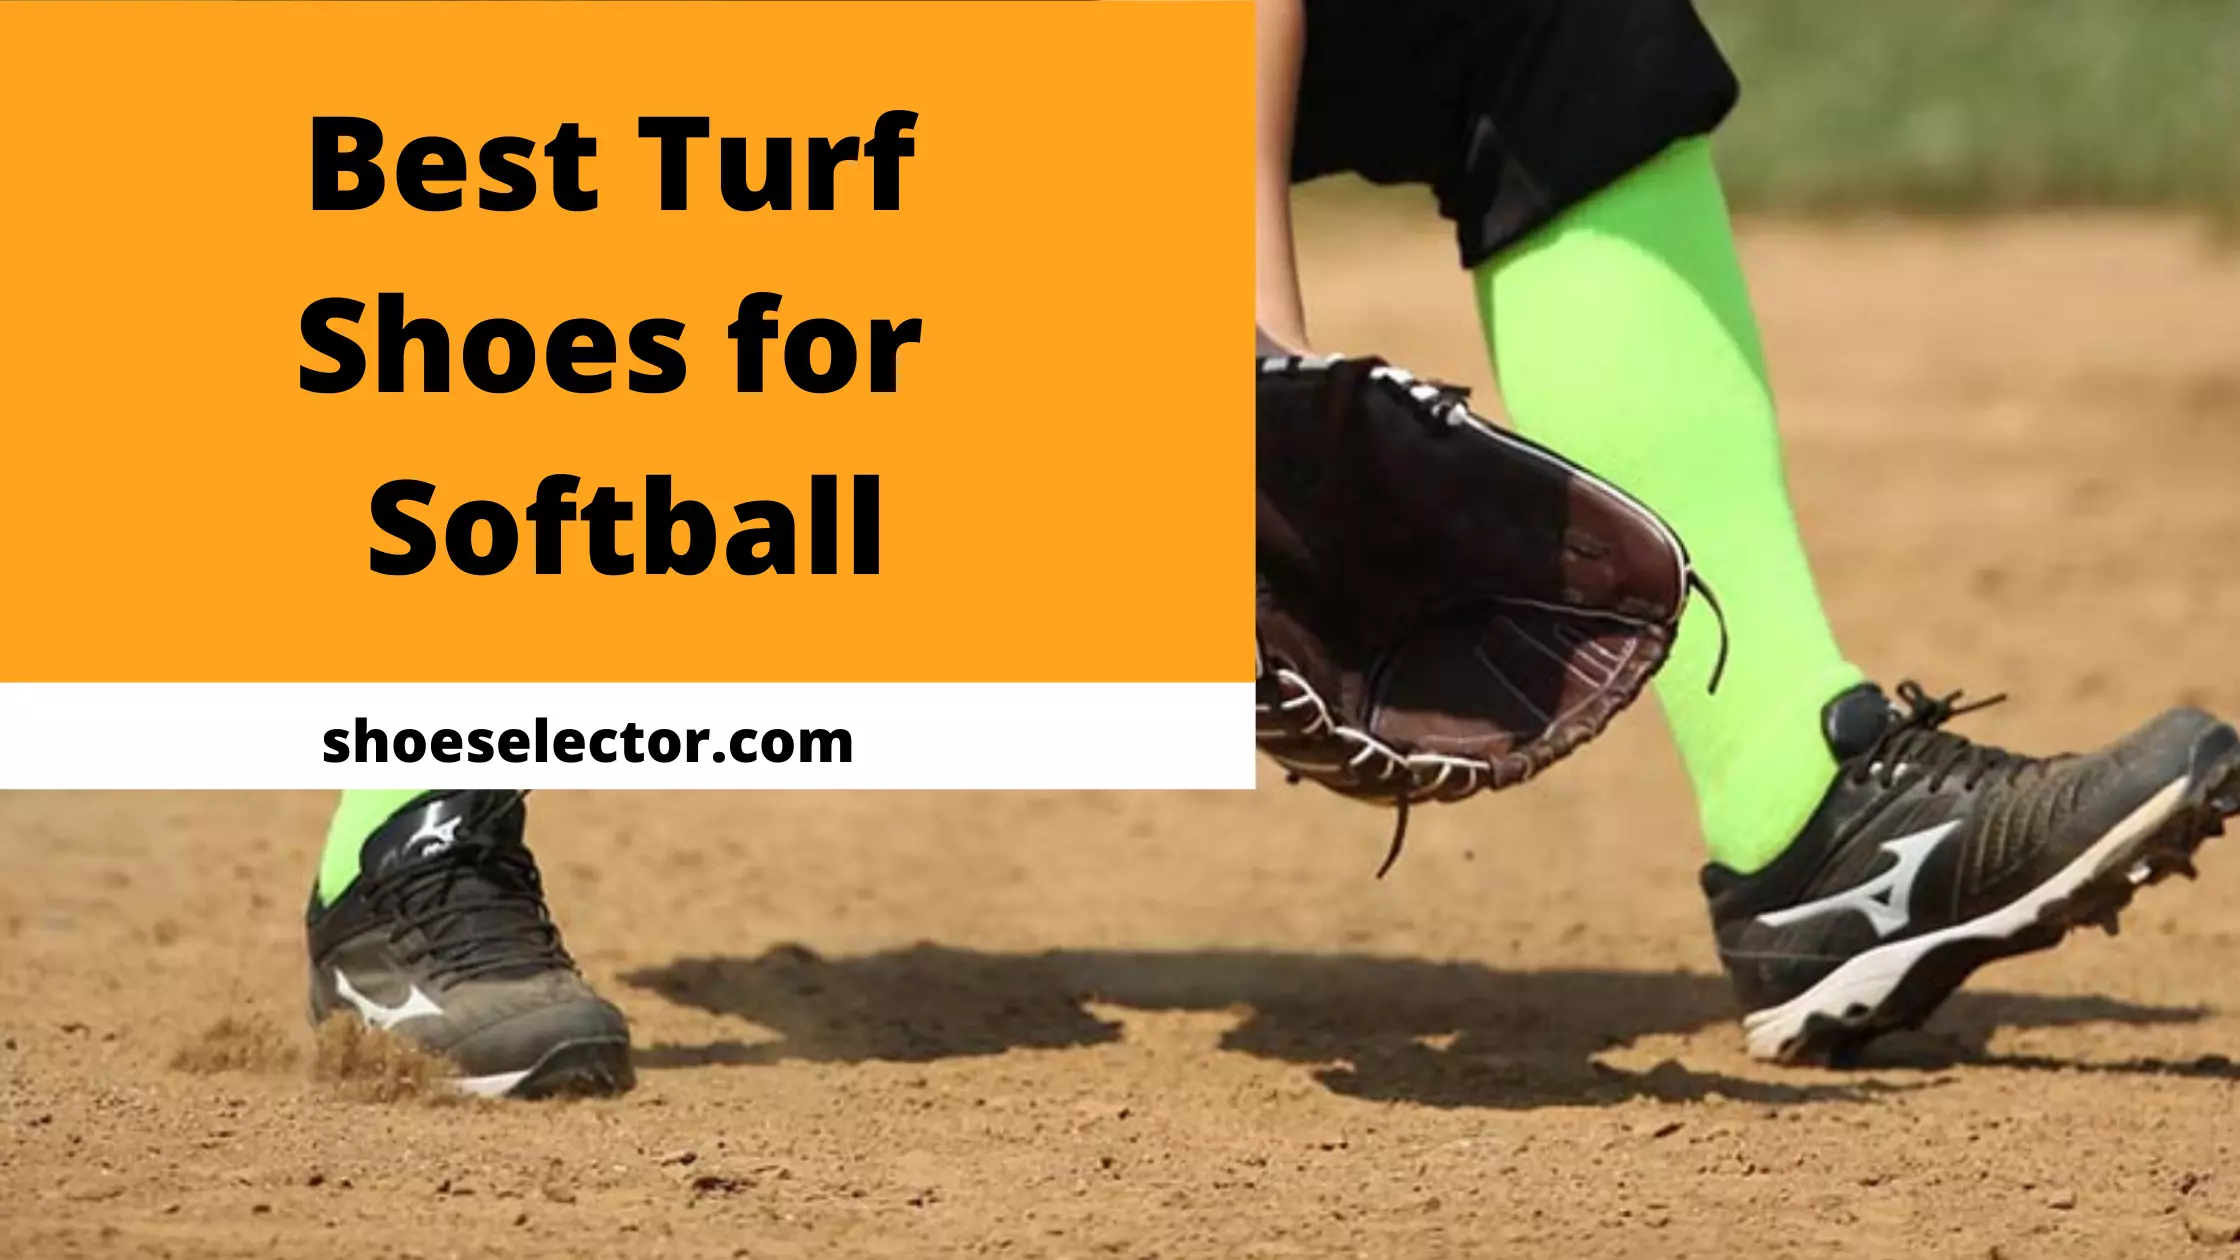 Best Turf Shoes for Softball - Top Brands Buyer's Guide